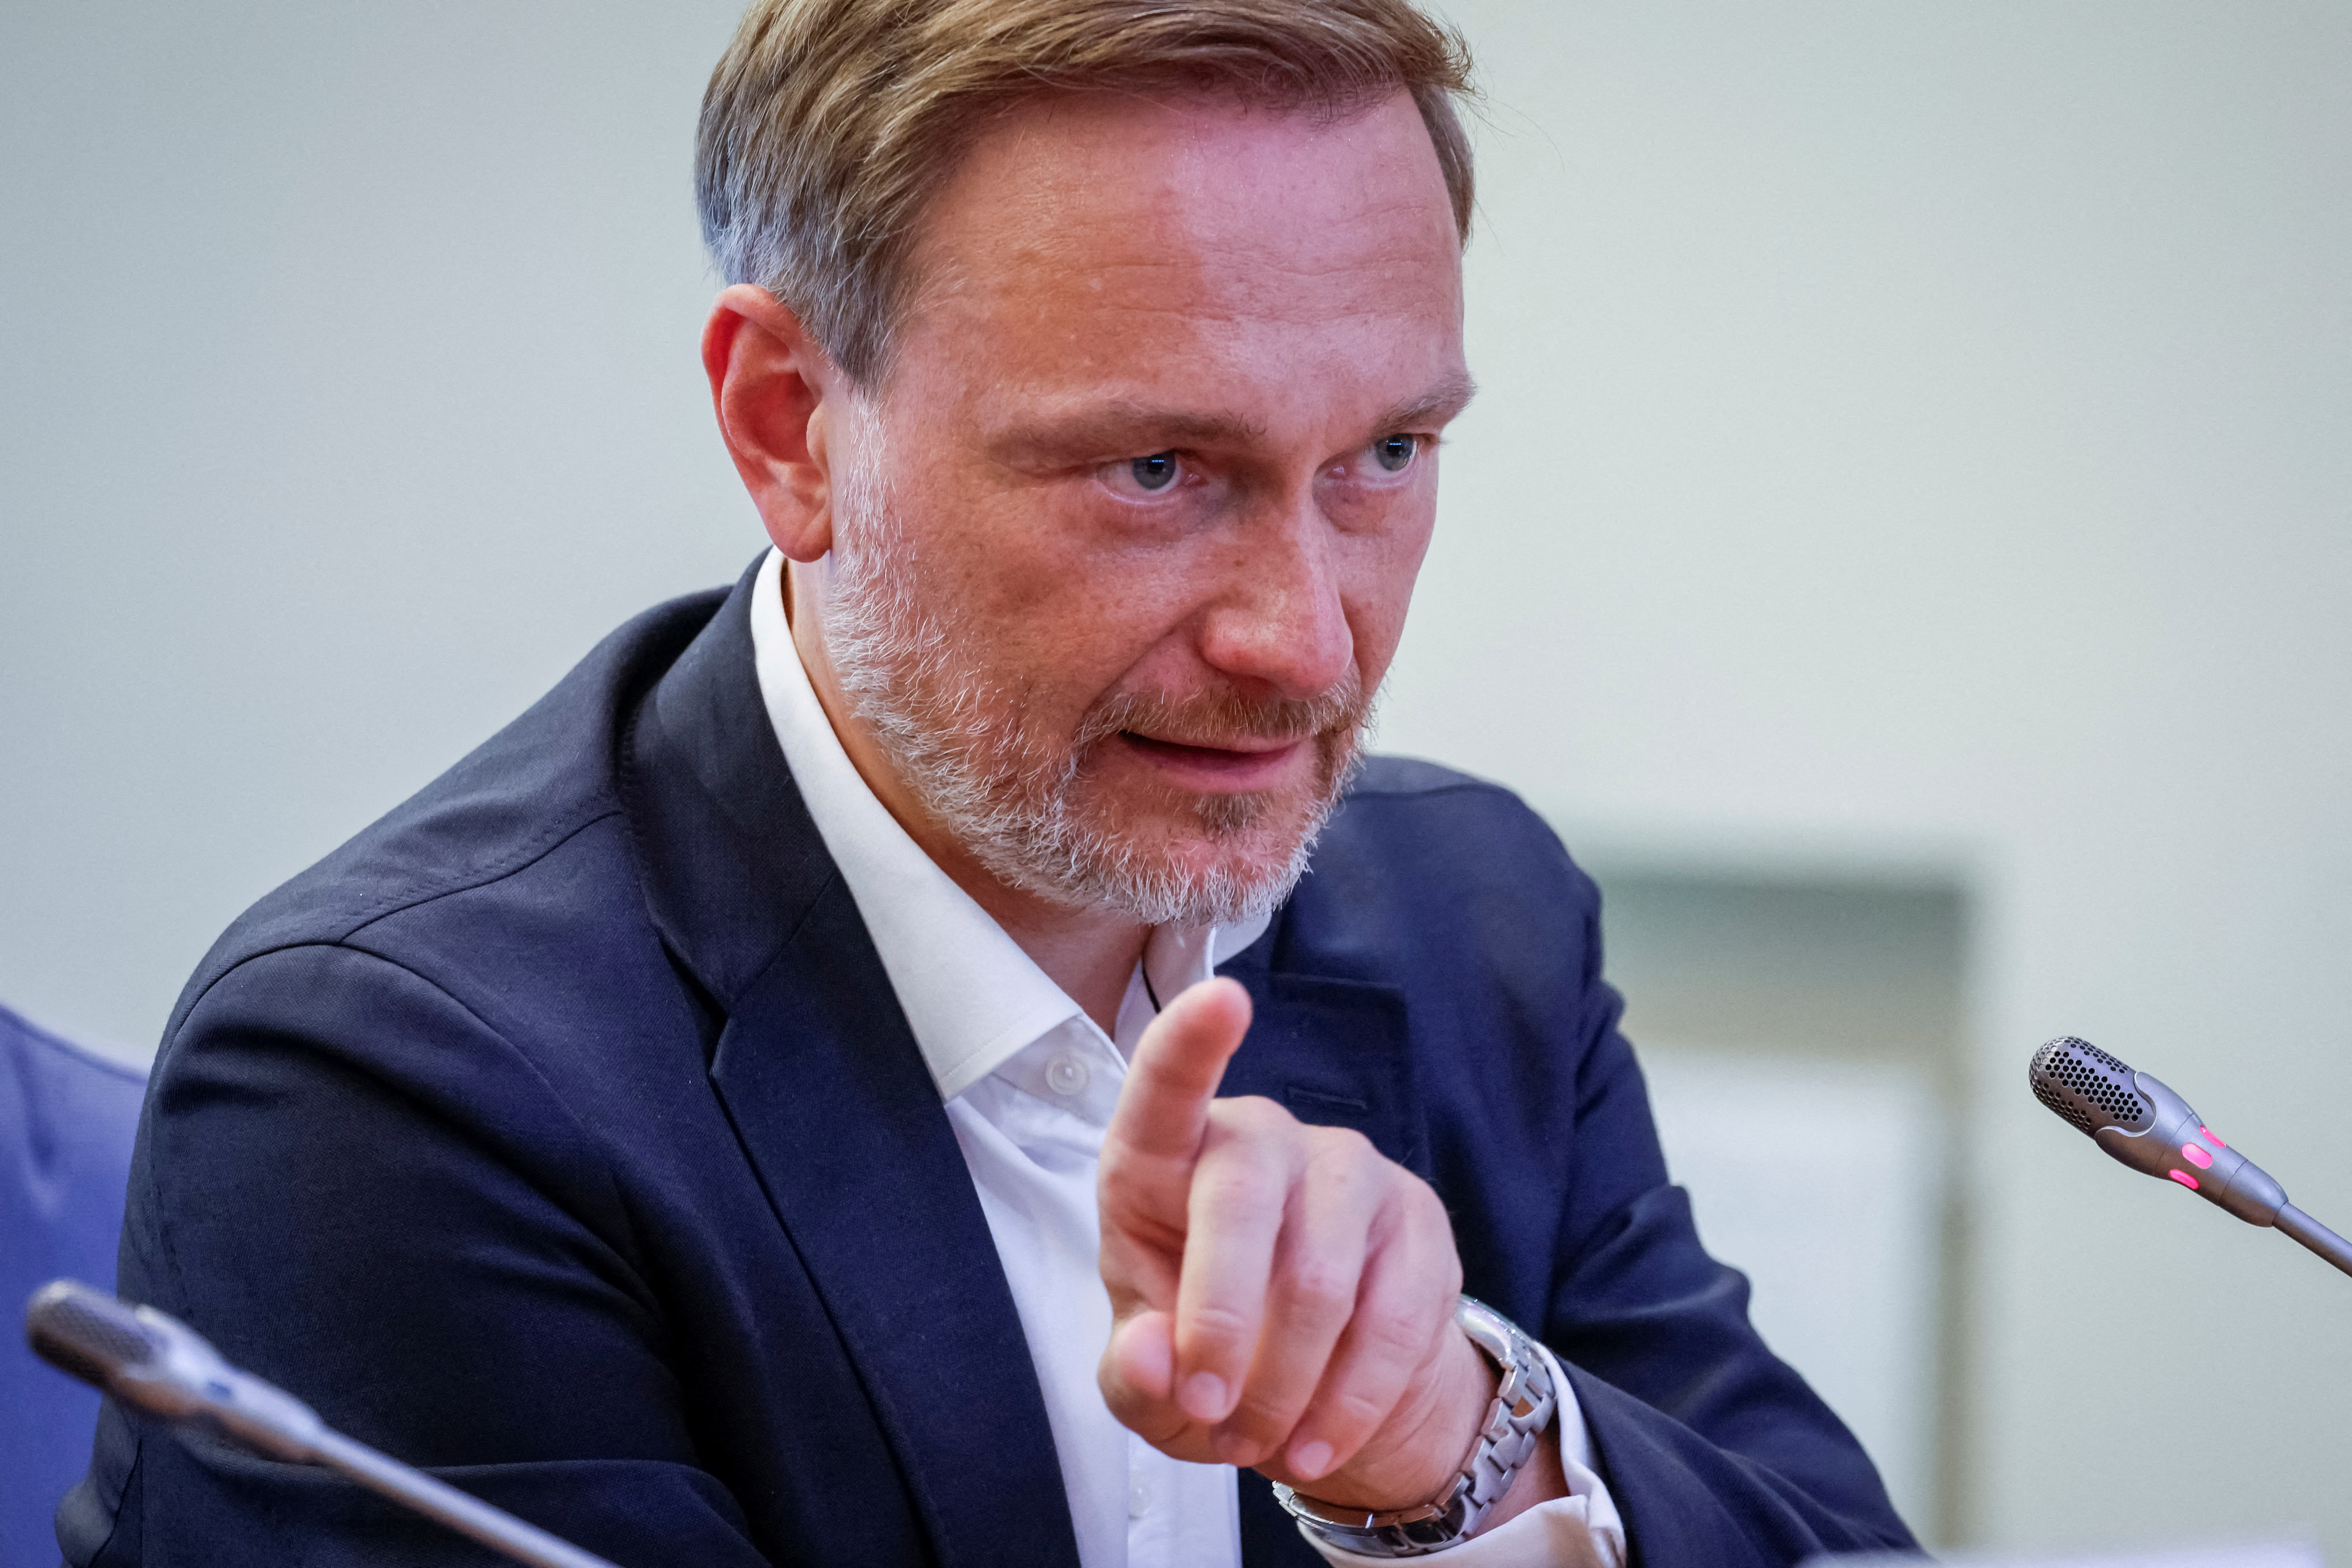 Christian Lindner has created 50 new tax policies – but opposition parties have criticized the government. /Alina Smutko/Reuters